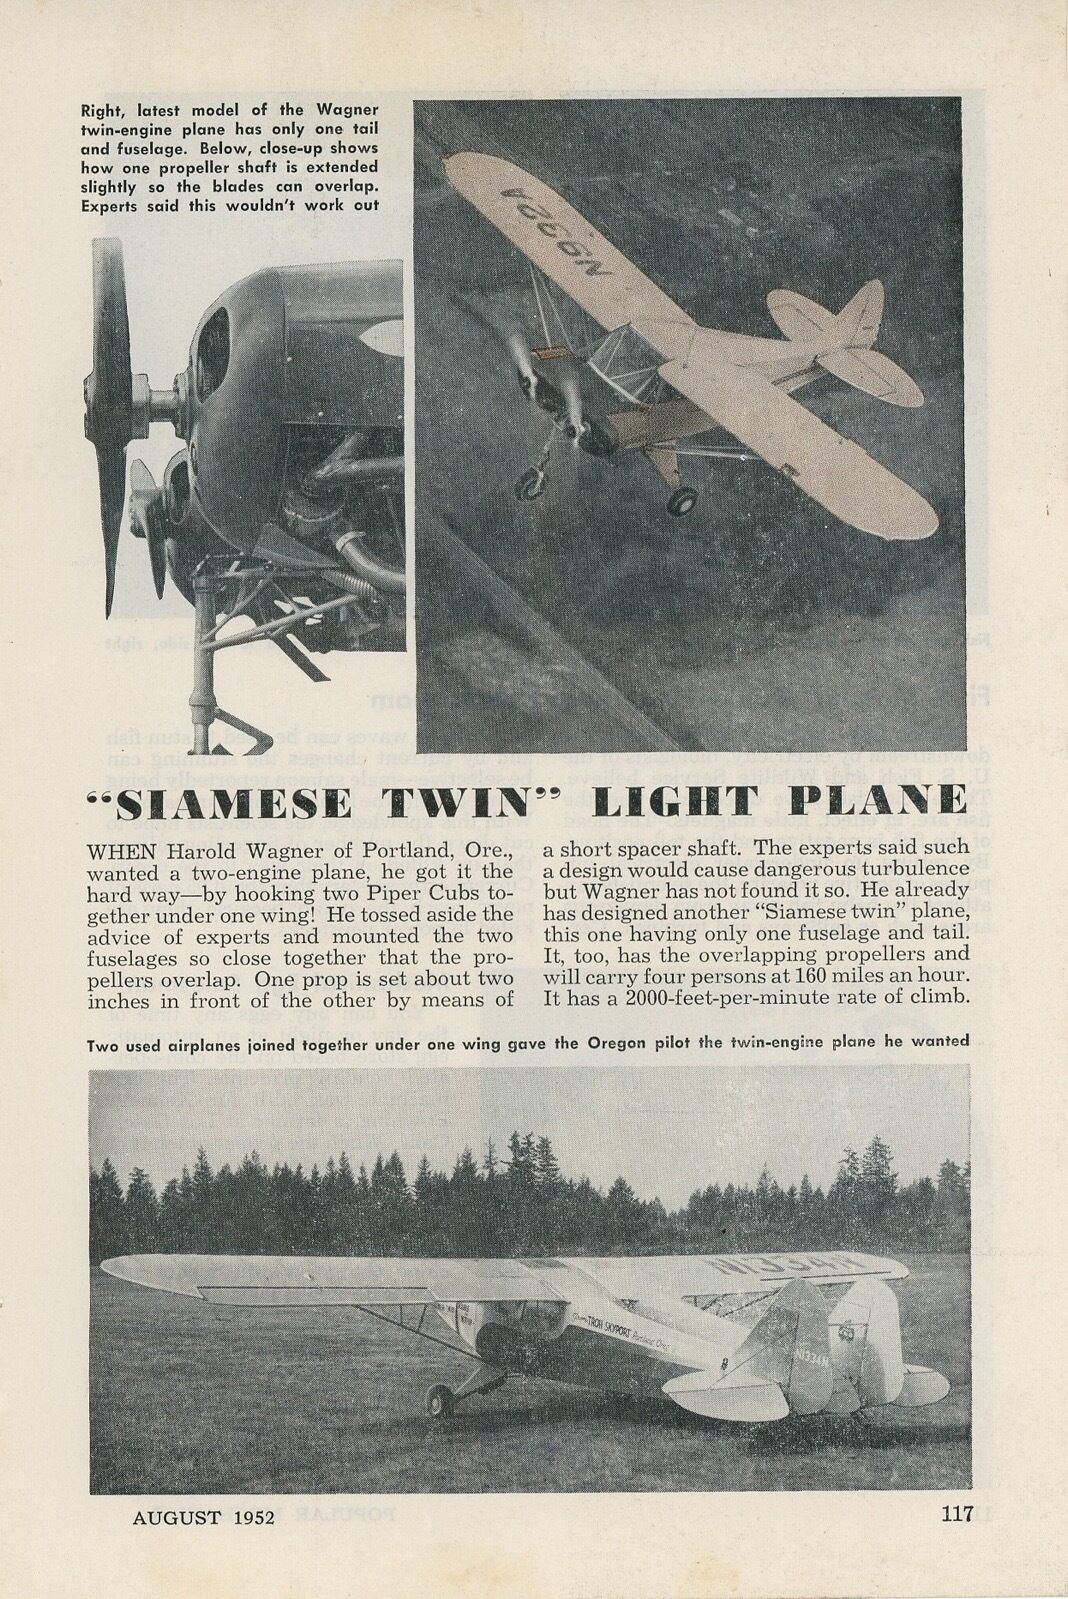 1952 Siamese Twin Airplane 2 Piper Cubs Joined Together 2 Engine Portland Oregon